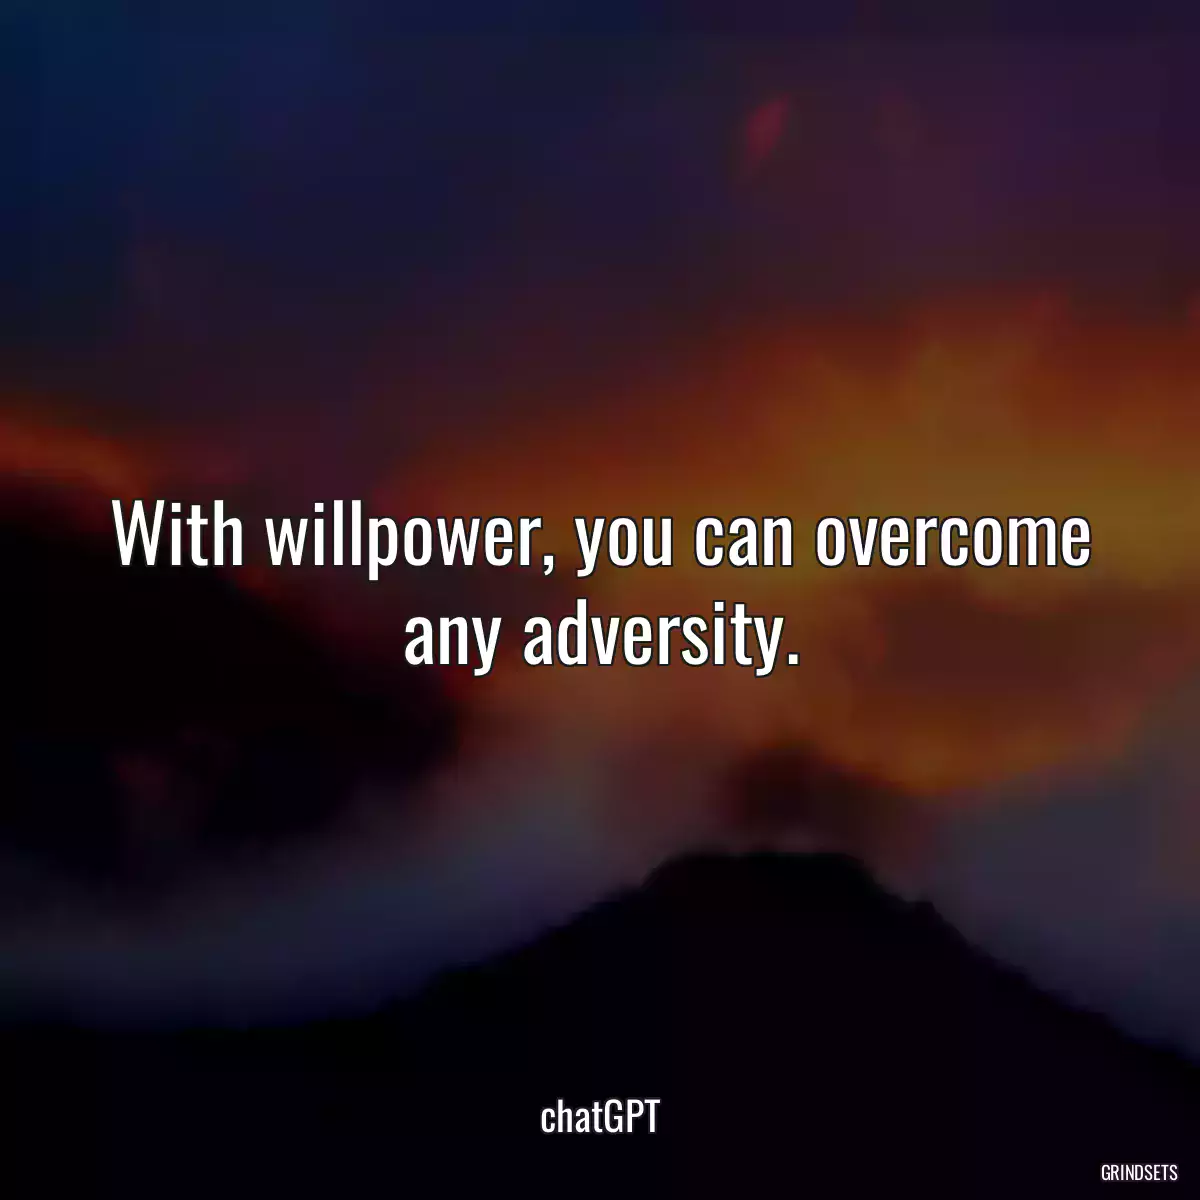 With willpower, you can overcome any adversity.